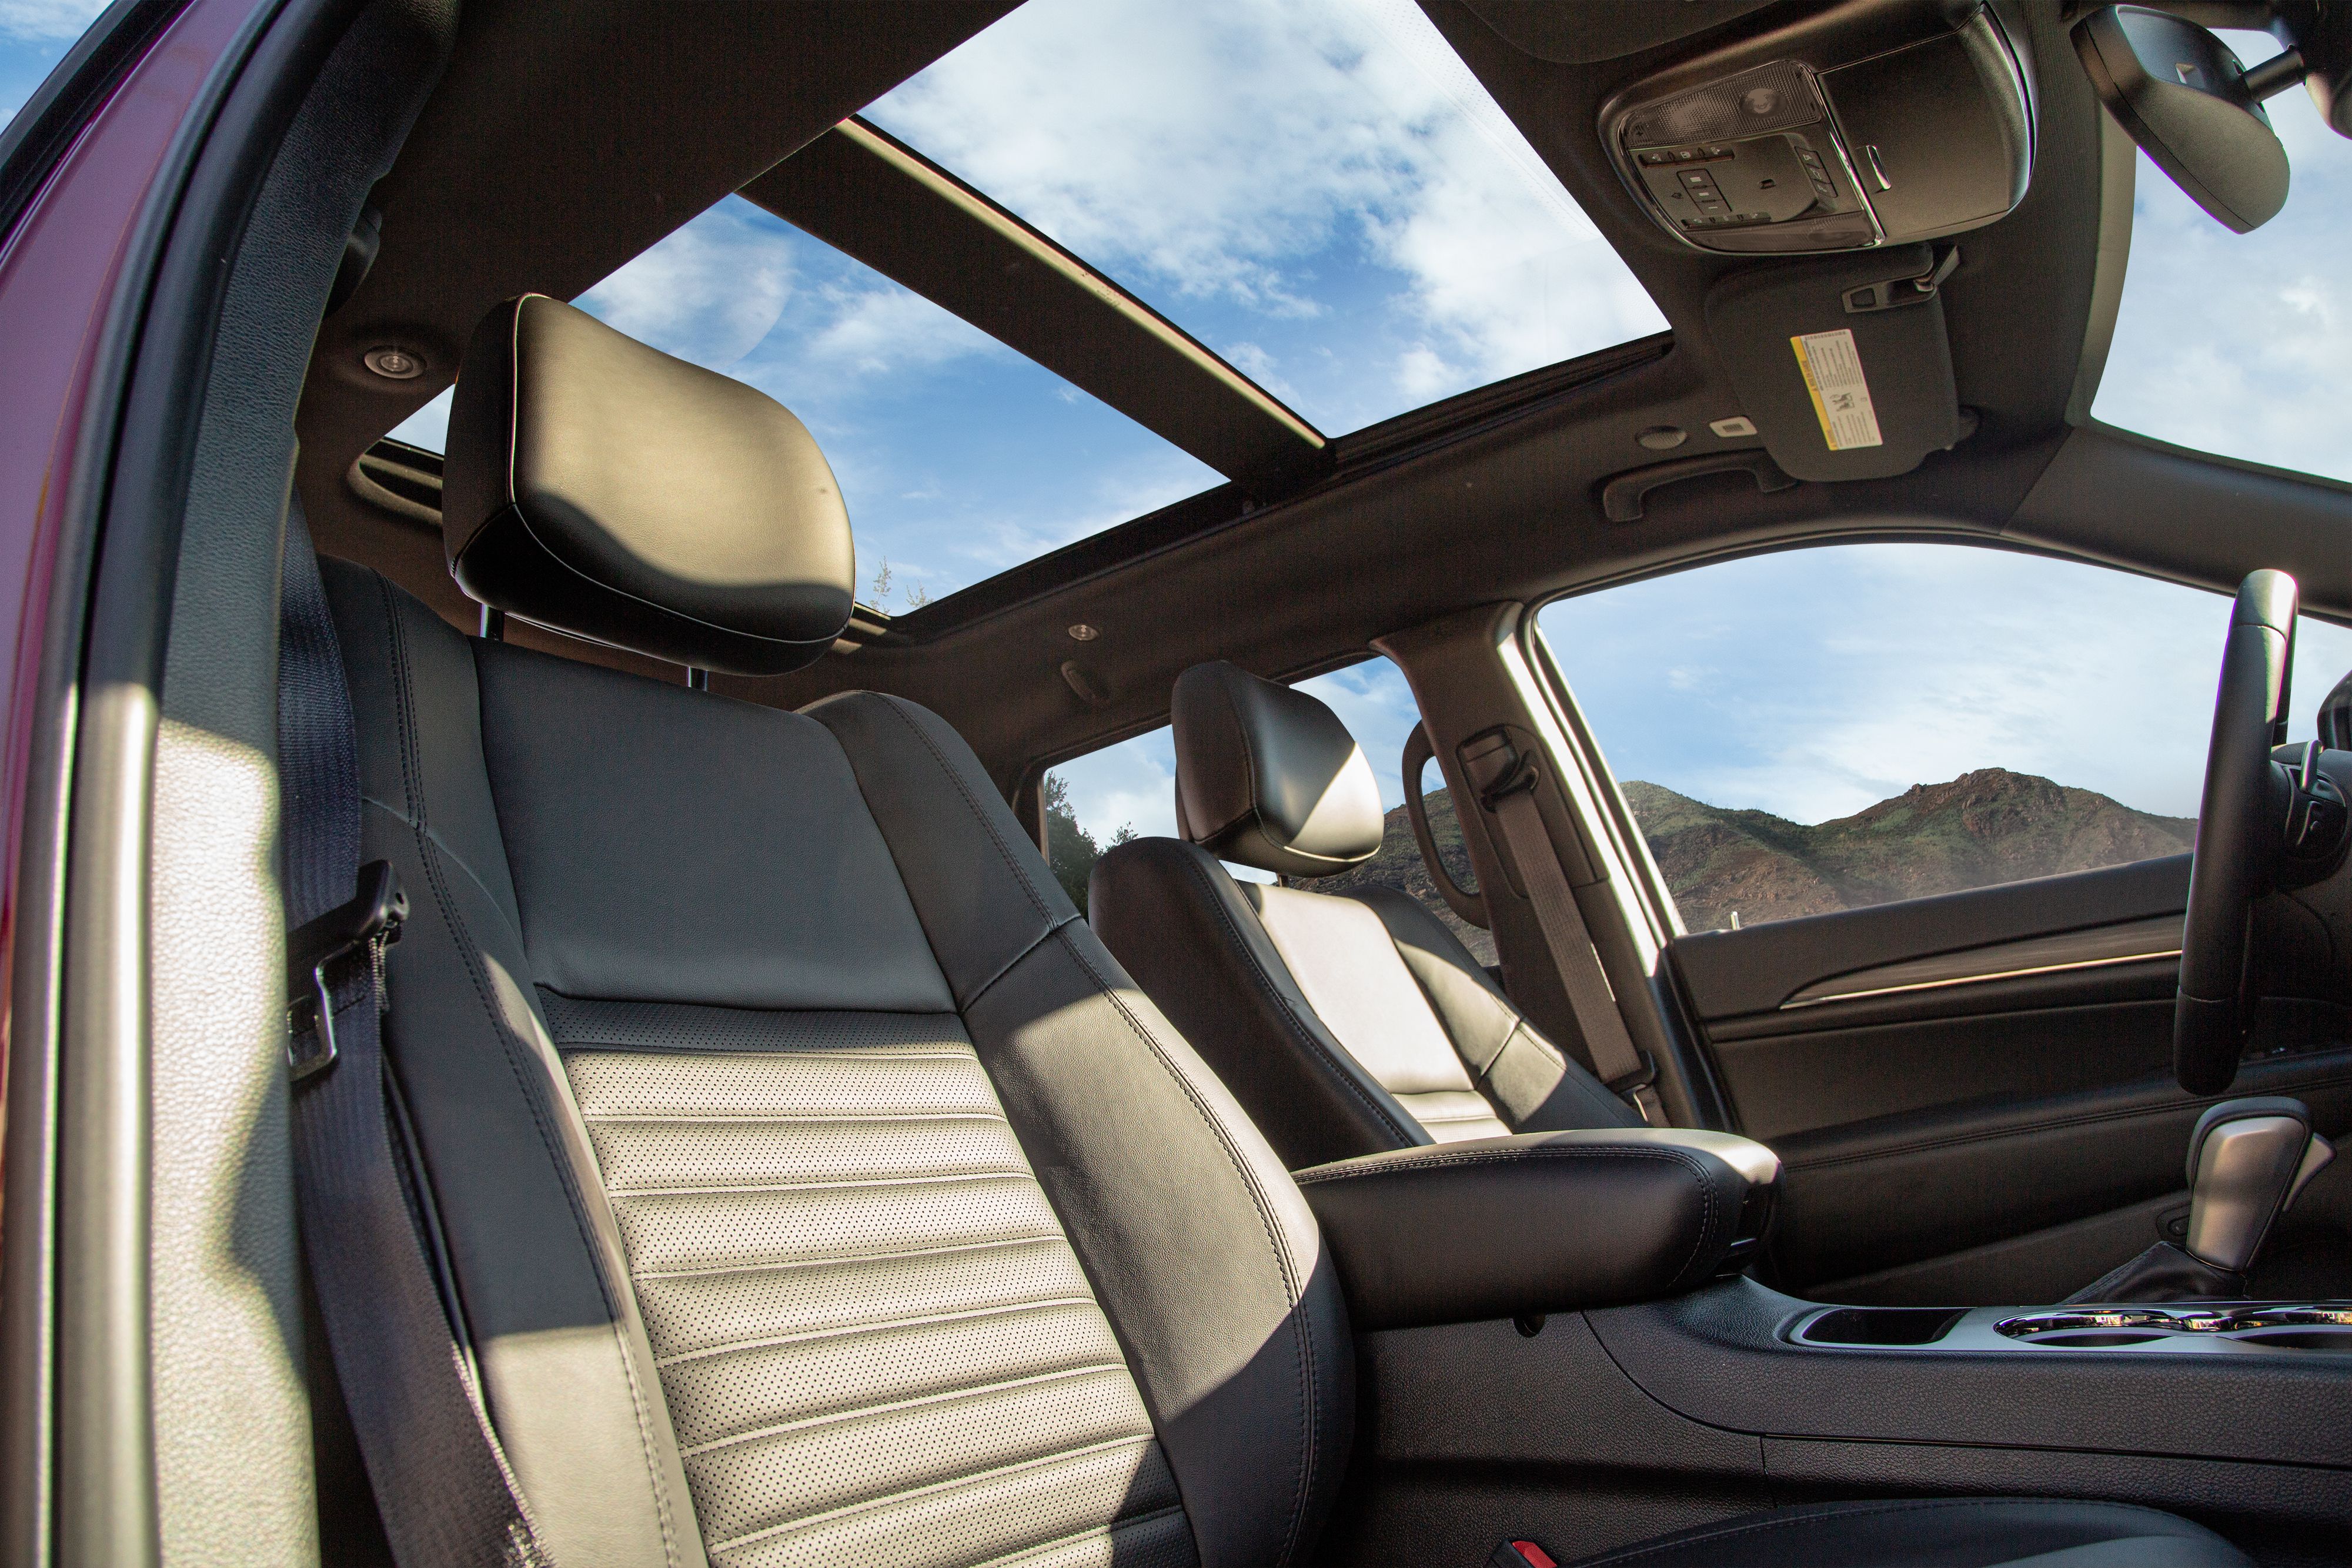 Jeep Grand Cherokee panoramic sunroof shown from the inside